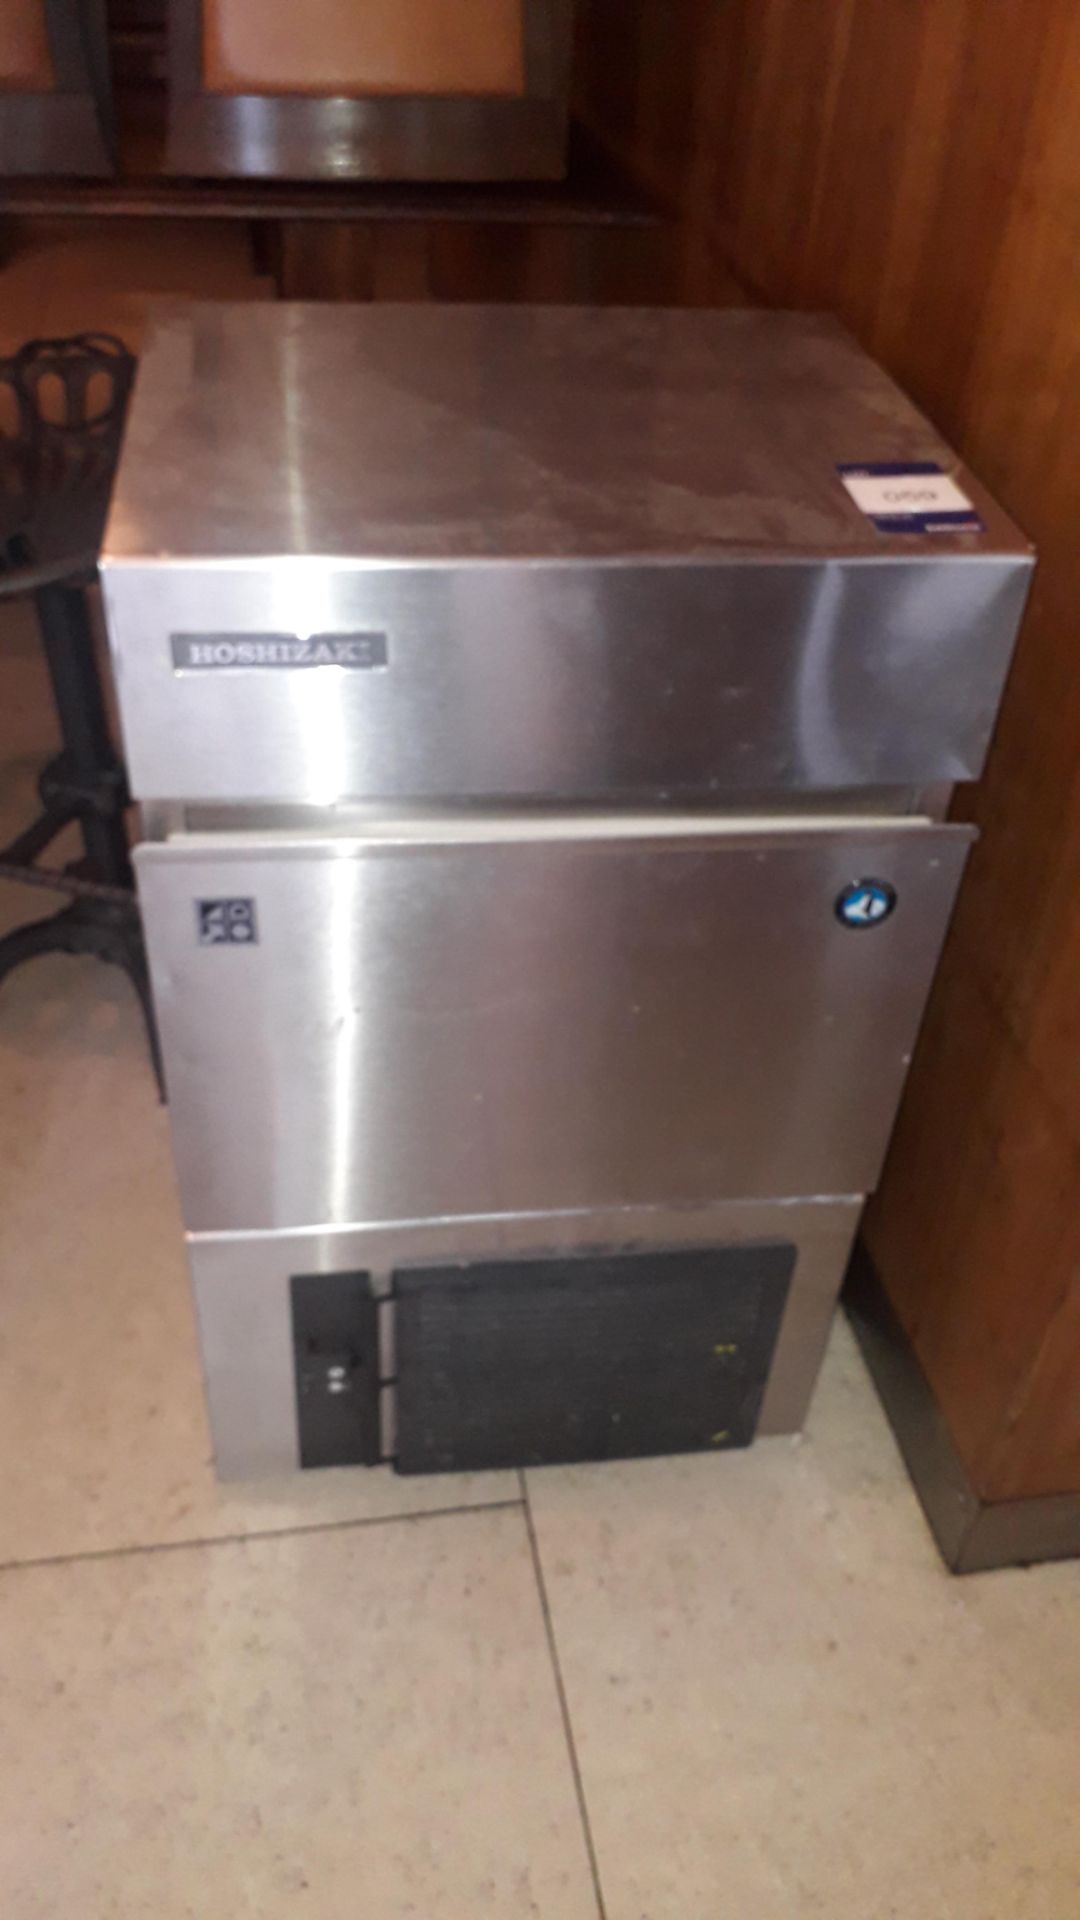 Hoshizaki IM-45NE stainless steel ice maker, Serial number C01285 (disconnected)